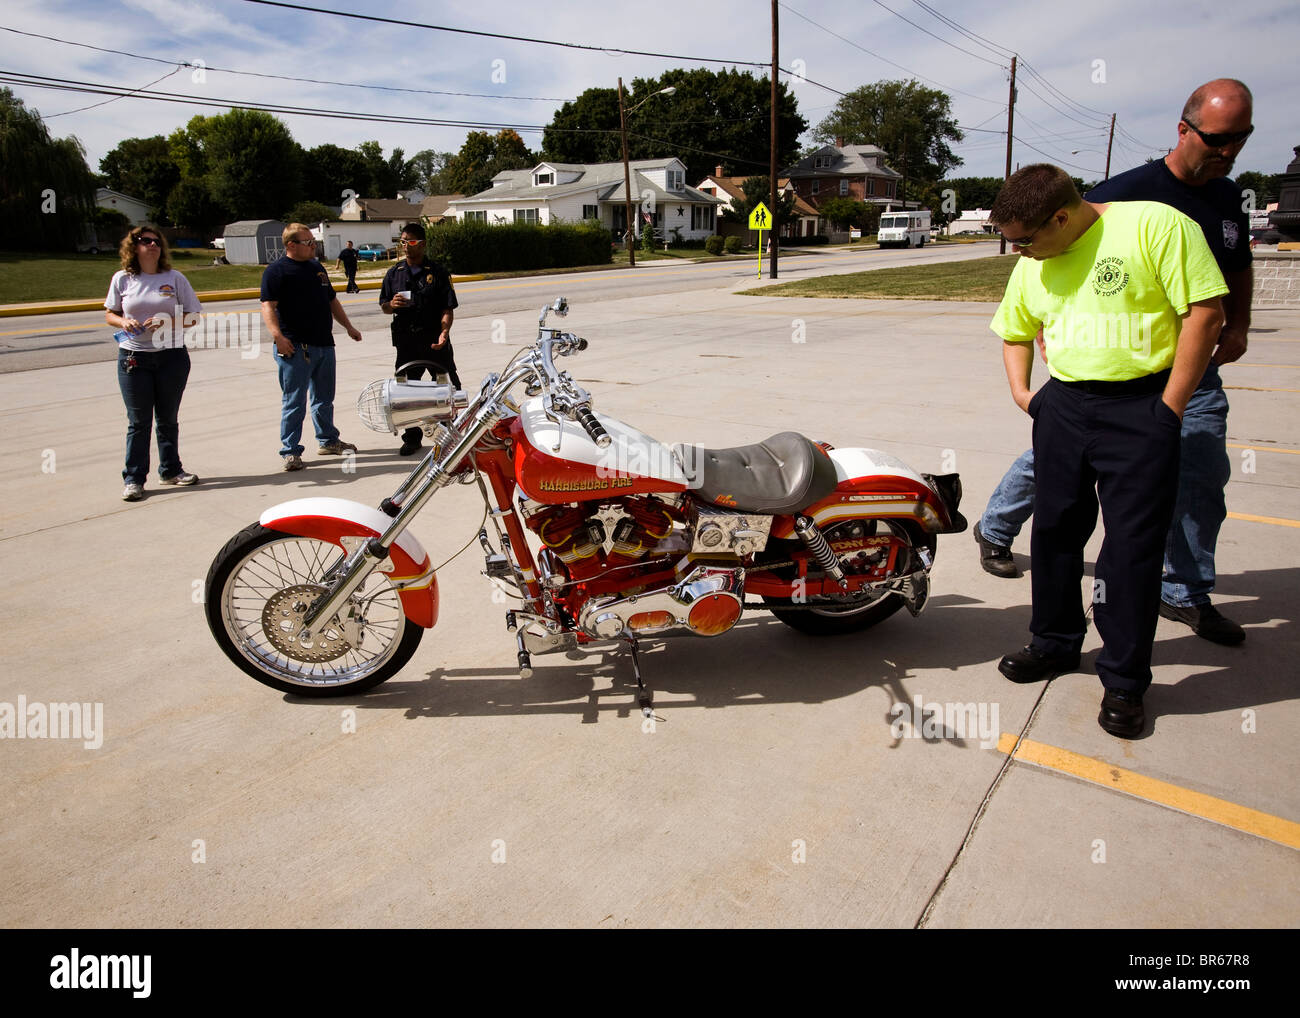 Custom fire department motorcycle Stock Photo